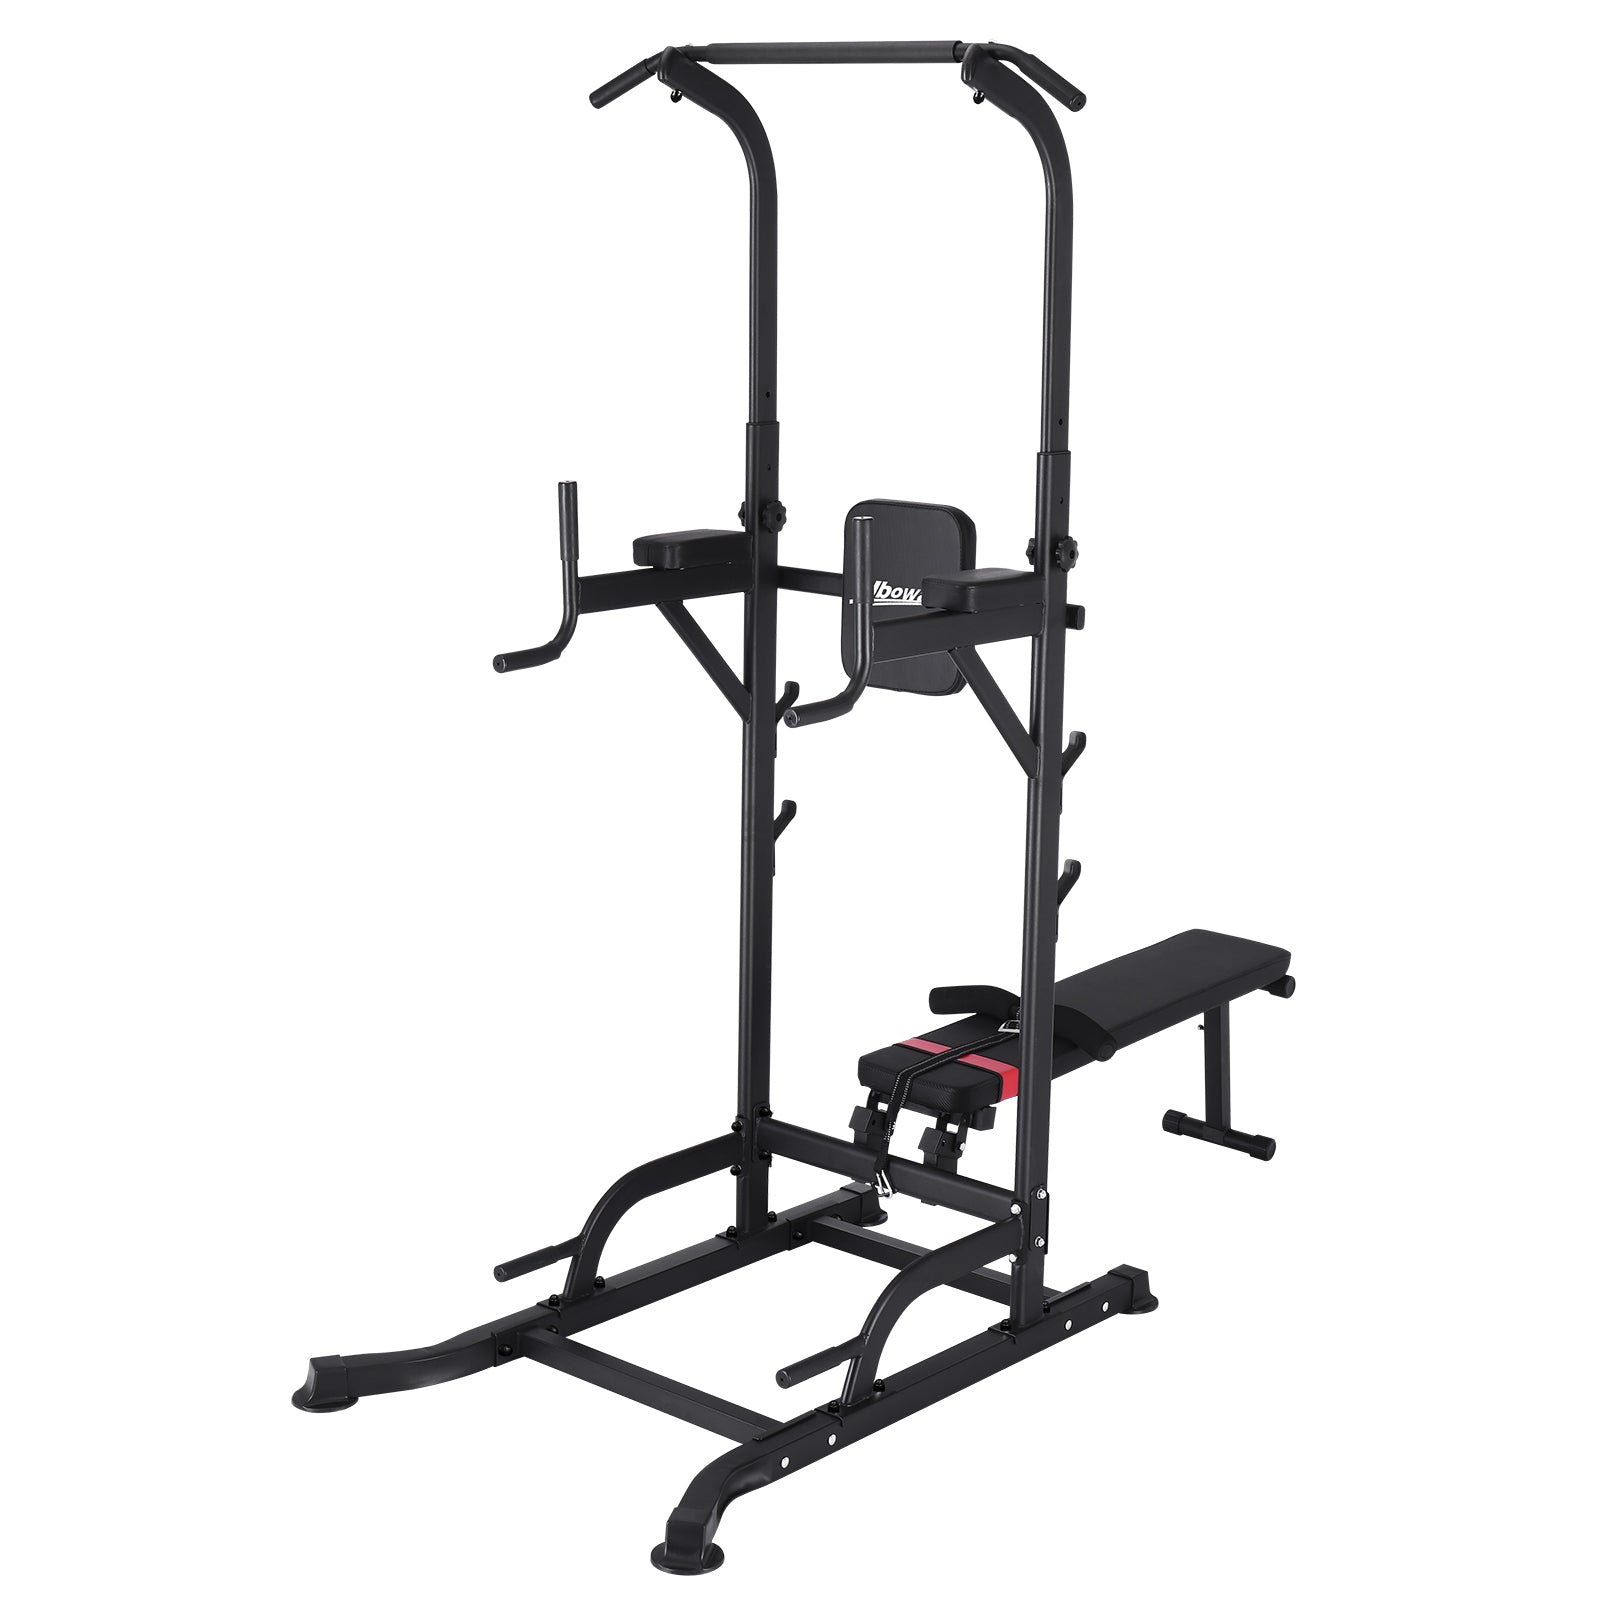 Adjustable Power Tower with Bench - Pull Up Bar Stand Dip Station Heavy Duty Multi-Function Fitness Training Equipment Home Gym